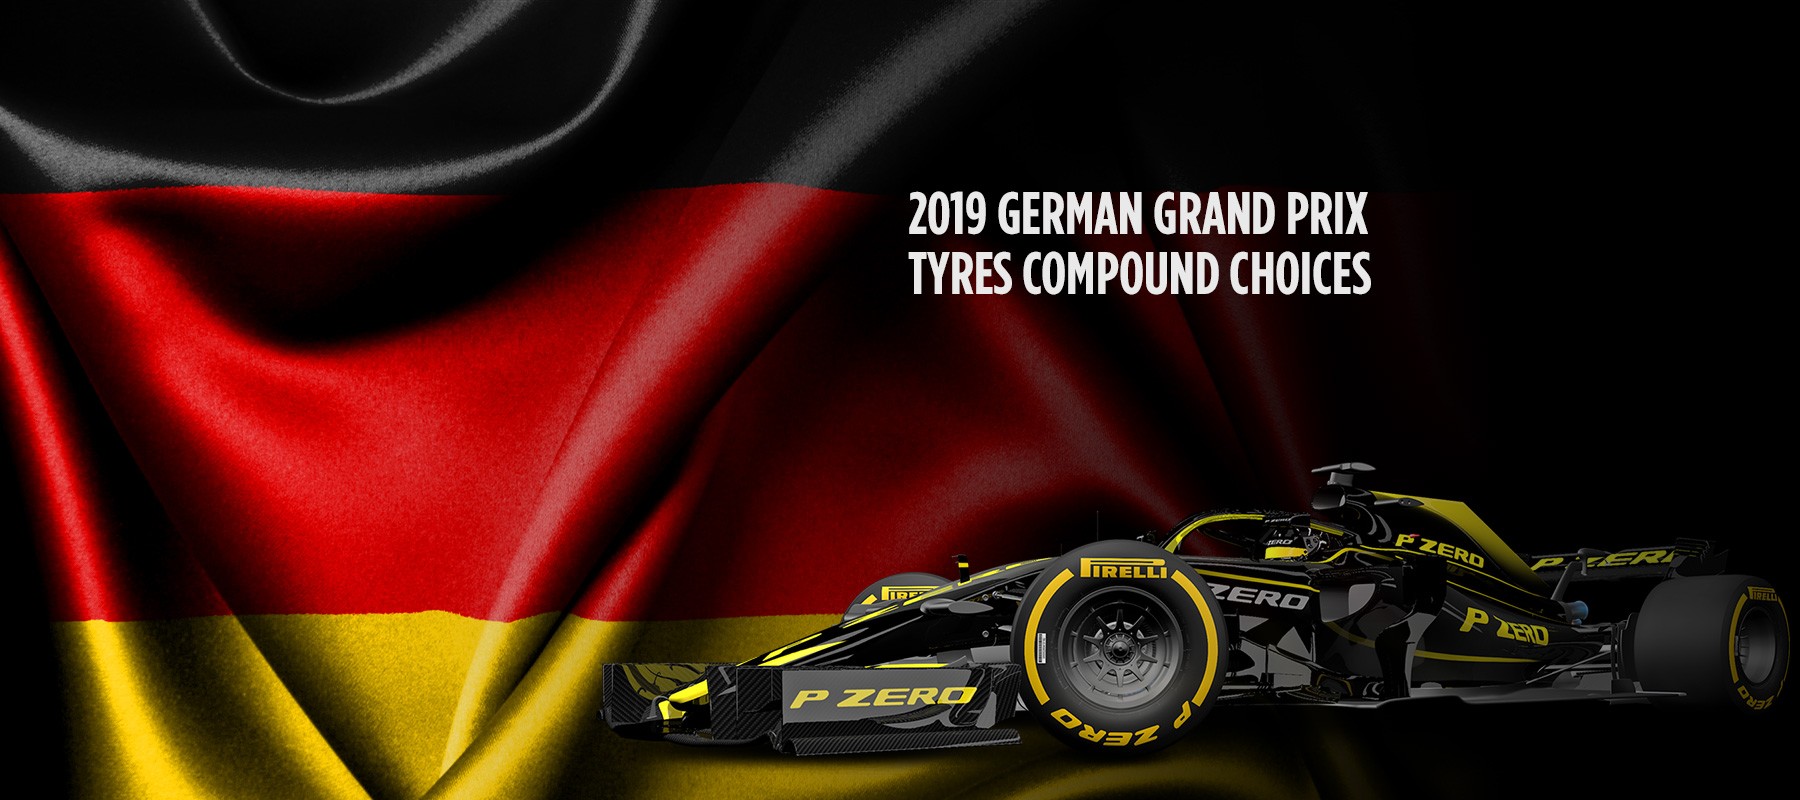 Pirelli is bringing the following compounds to the 2019 German Grand Prix